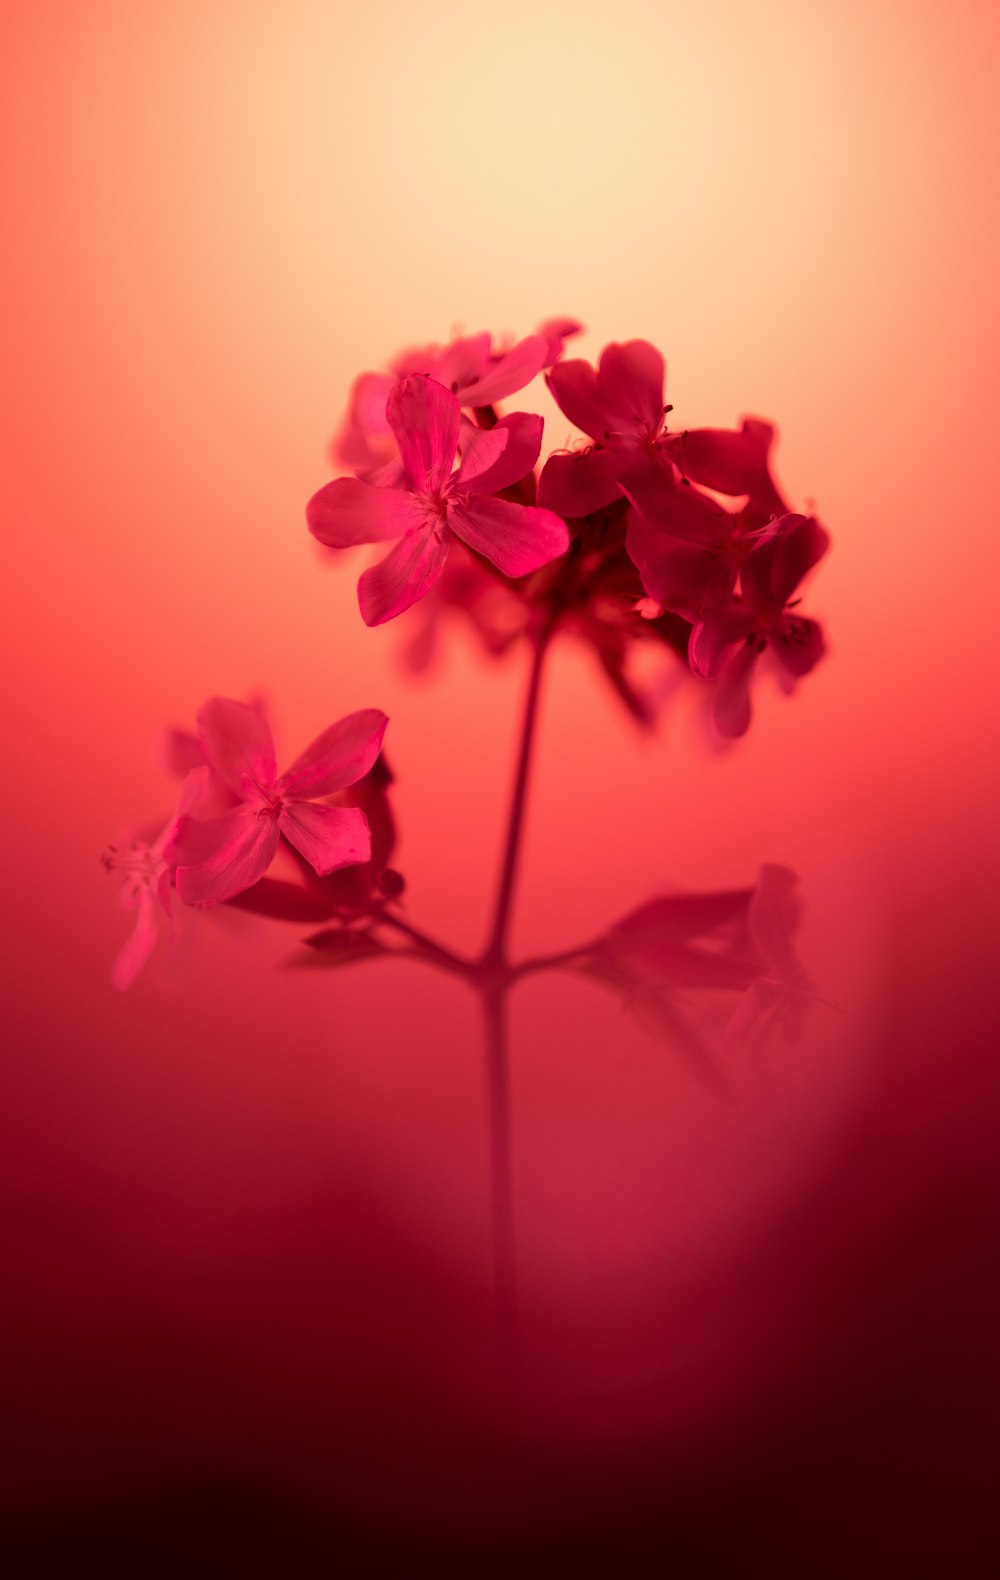 a close up of a pink flower on a red background